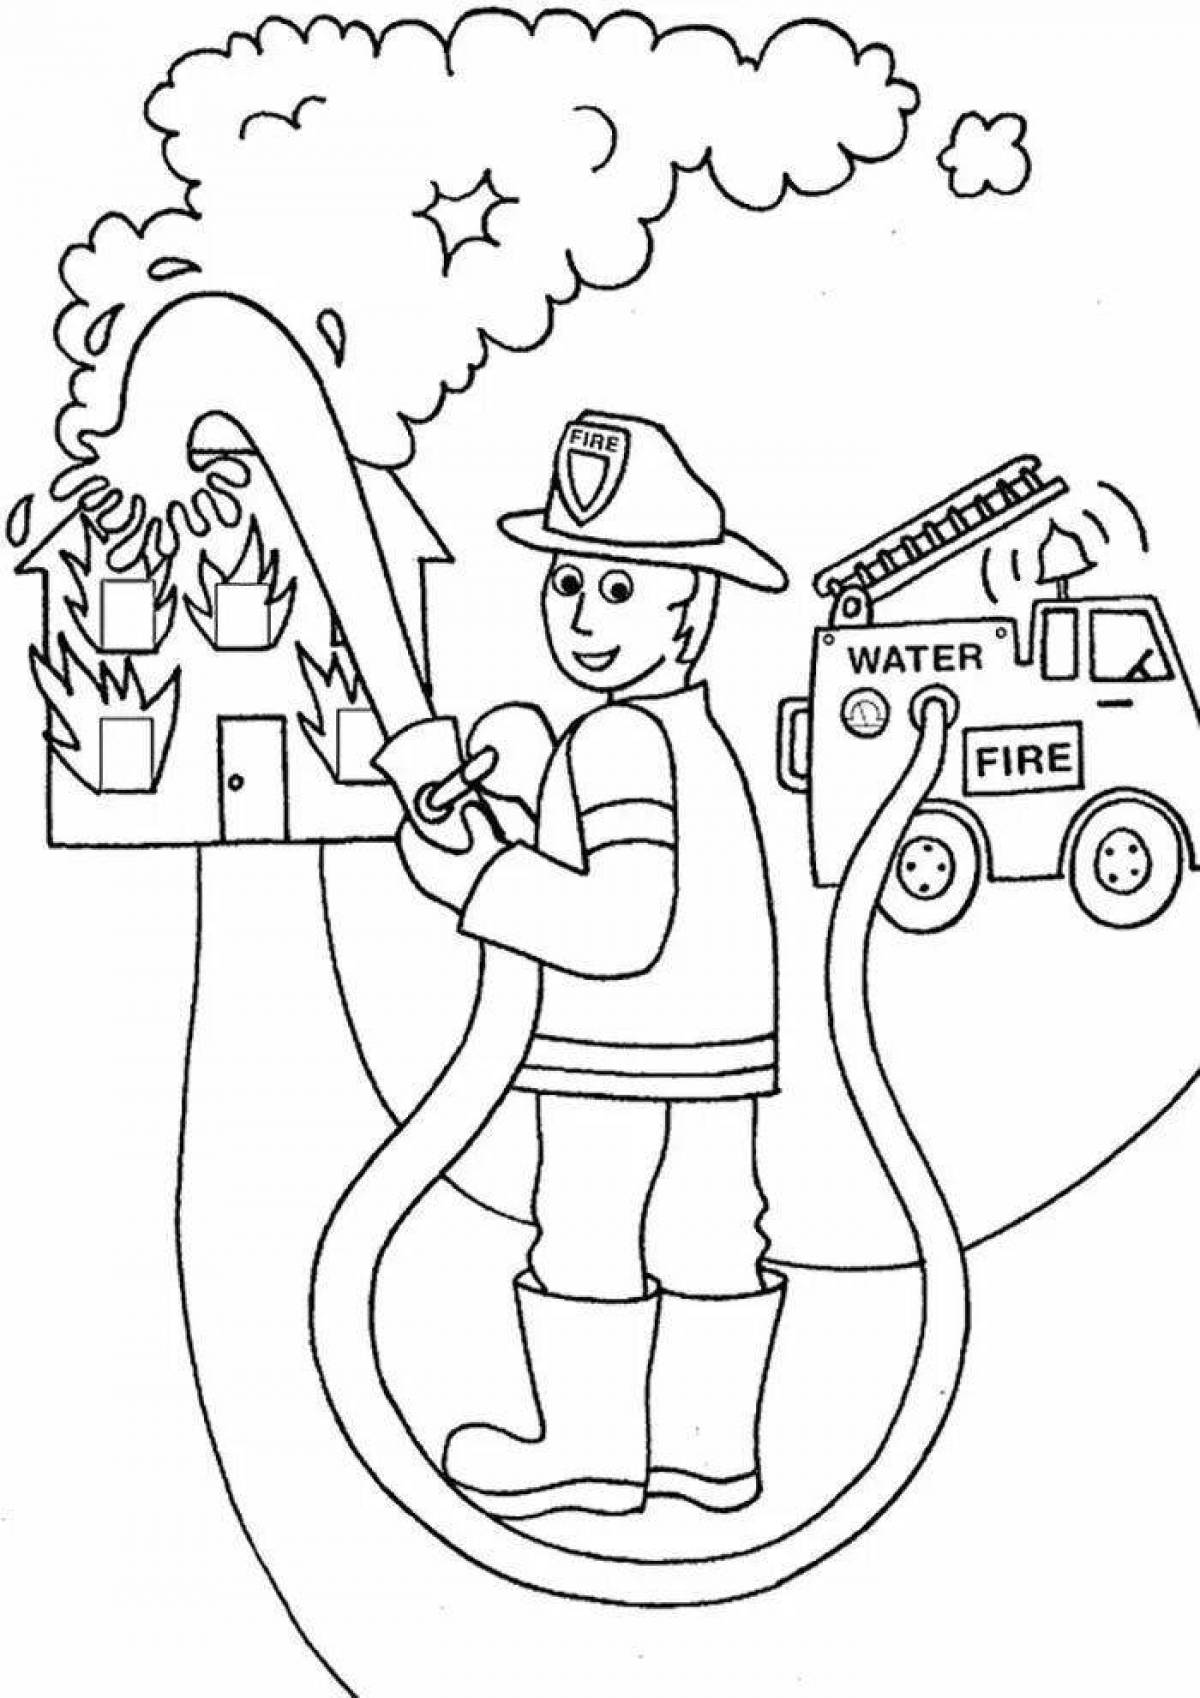 Royal firefighter coloring page